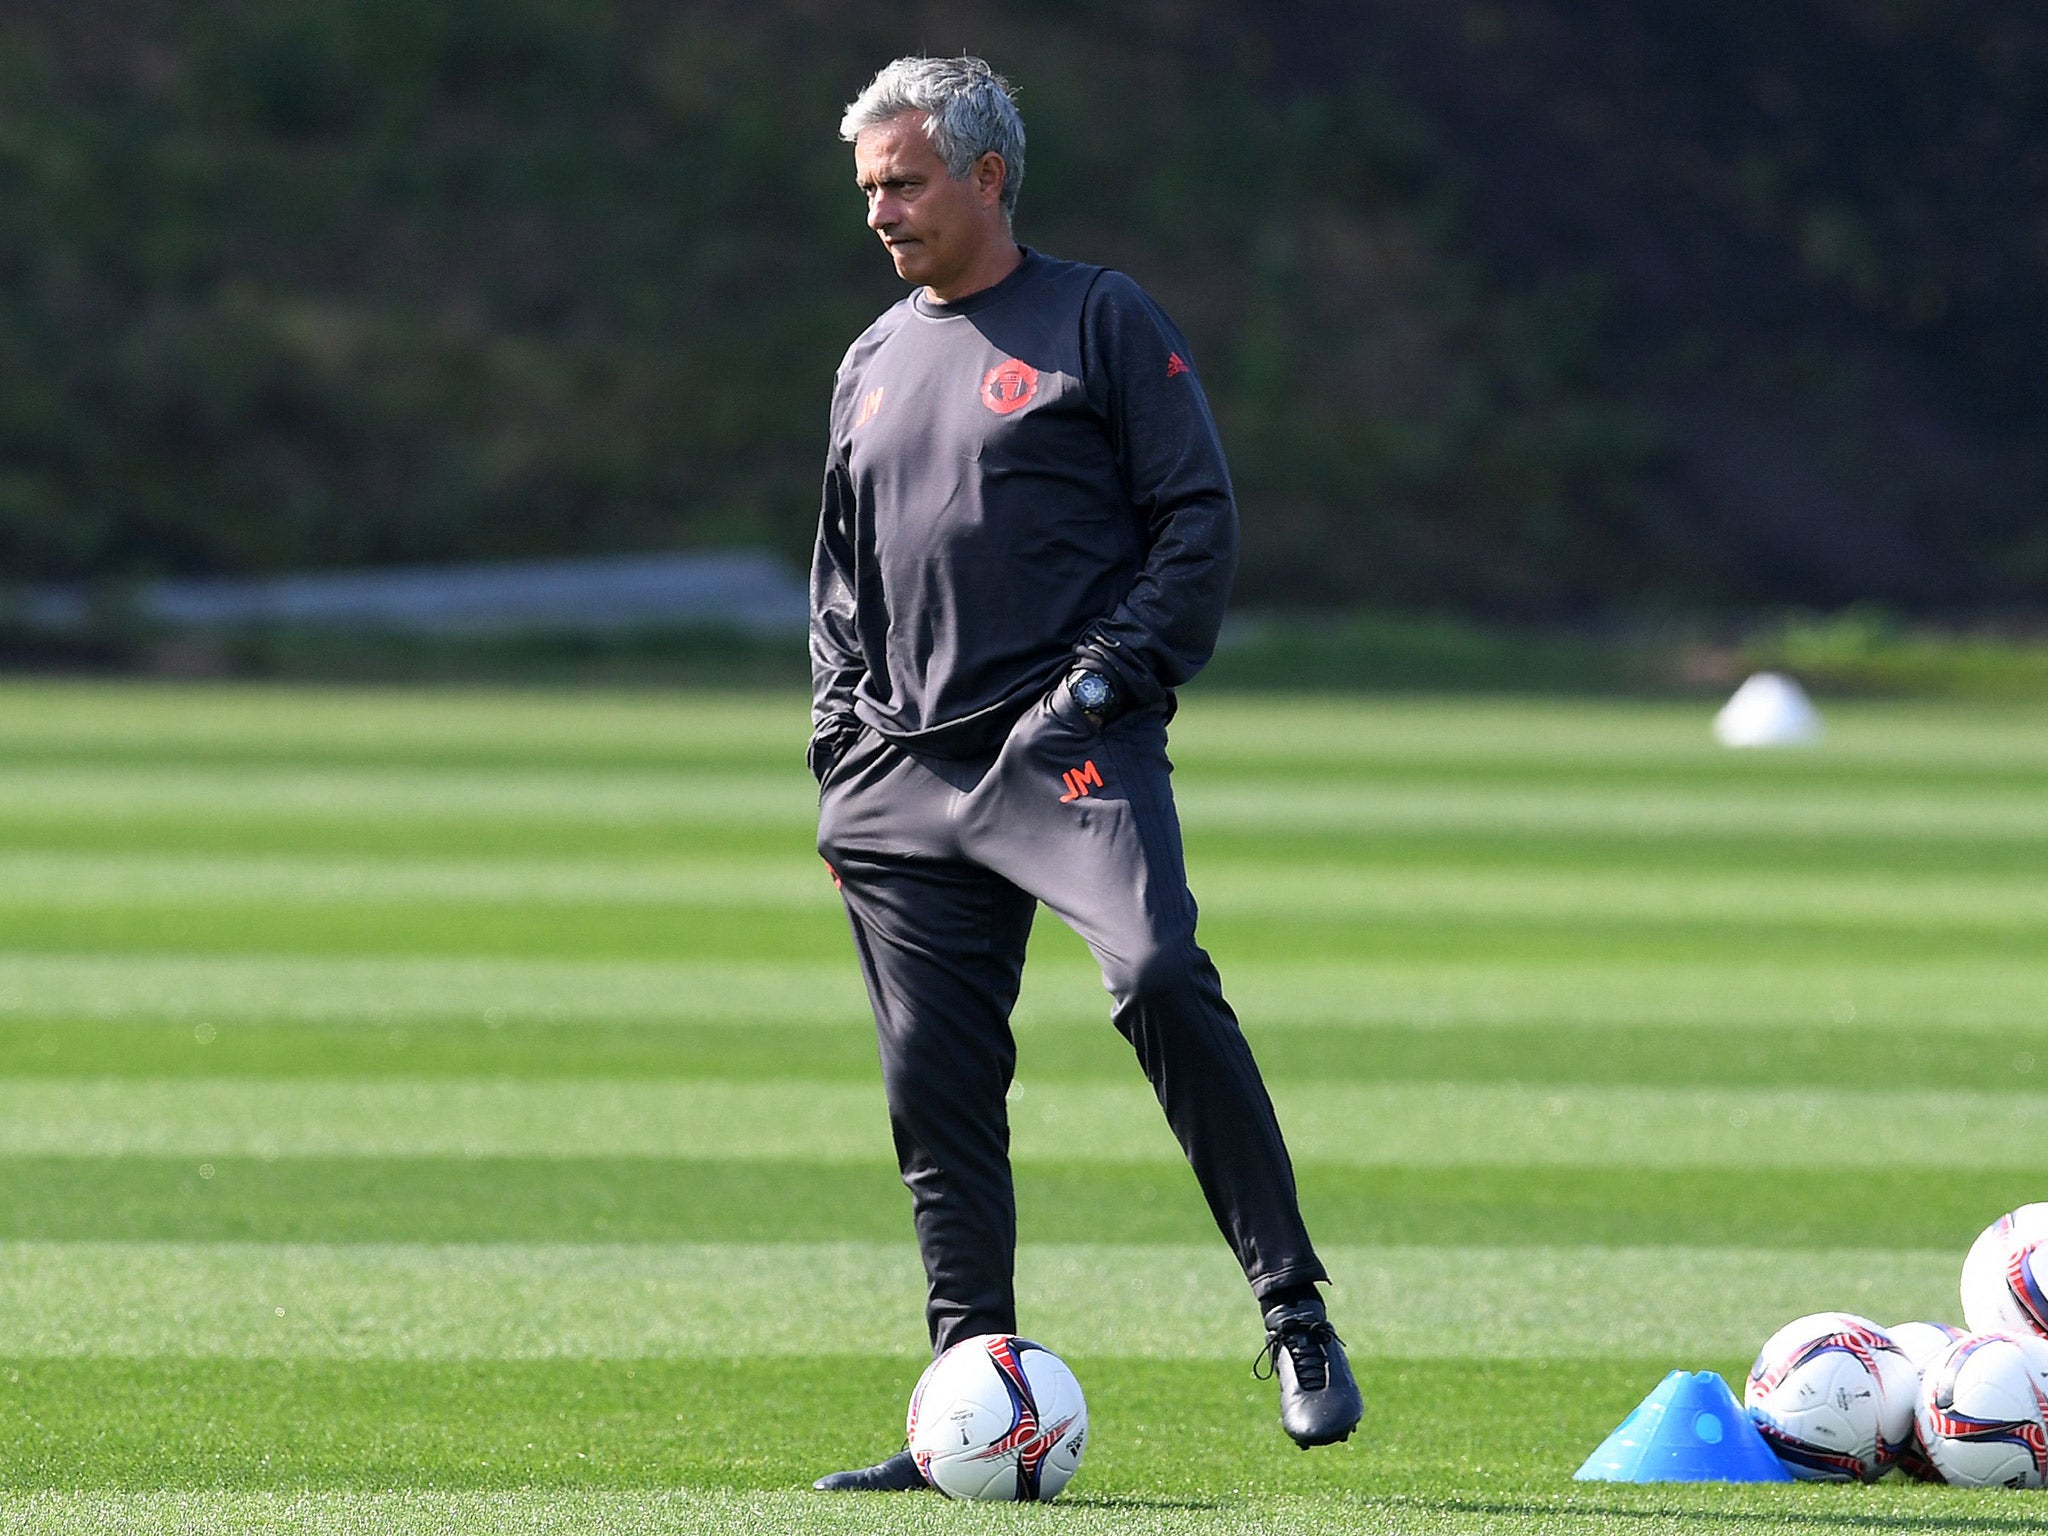 Jose Mourinho's training methods have been questioned by his own Manchester United players